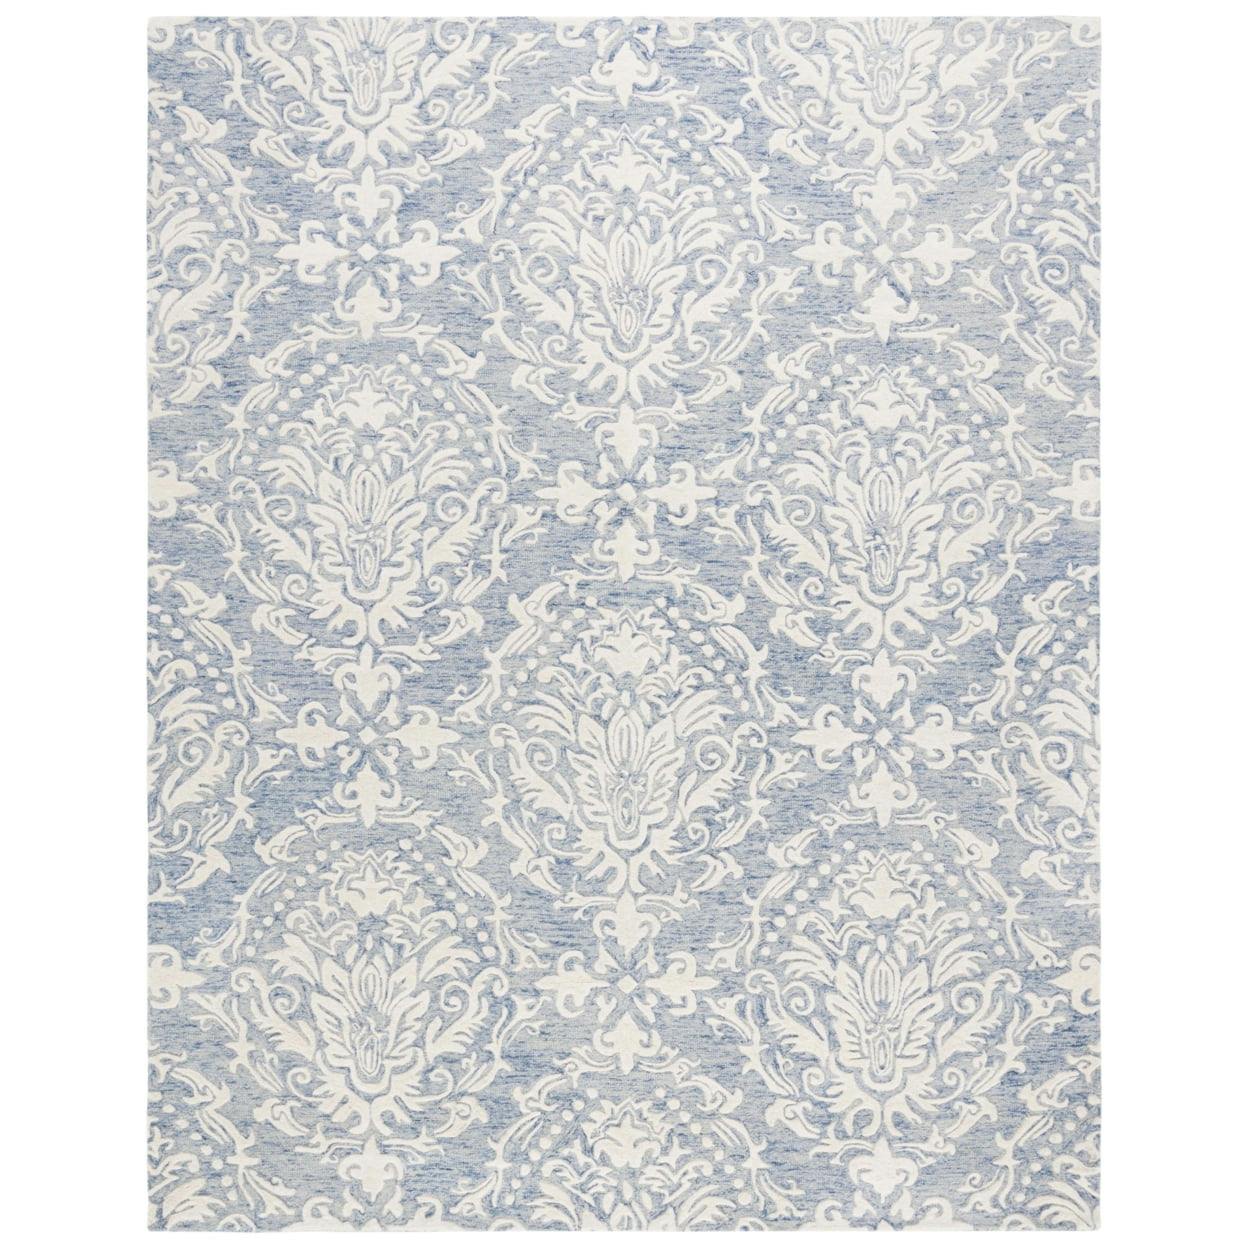 Hand-Tufted Blue/Ivory Floral Wool Area Rug, 9' x 12'